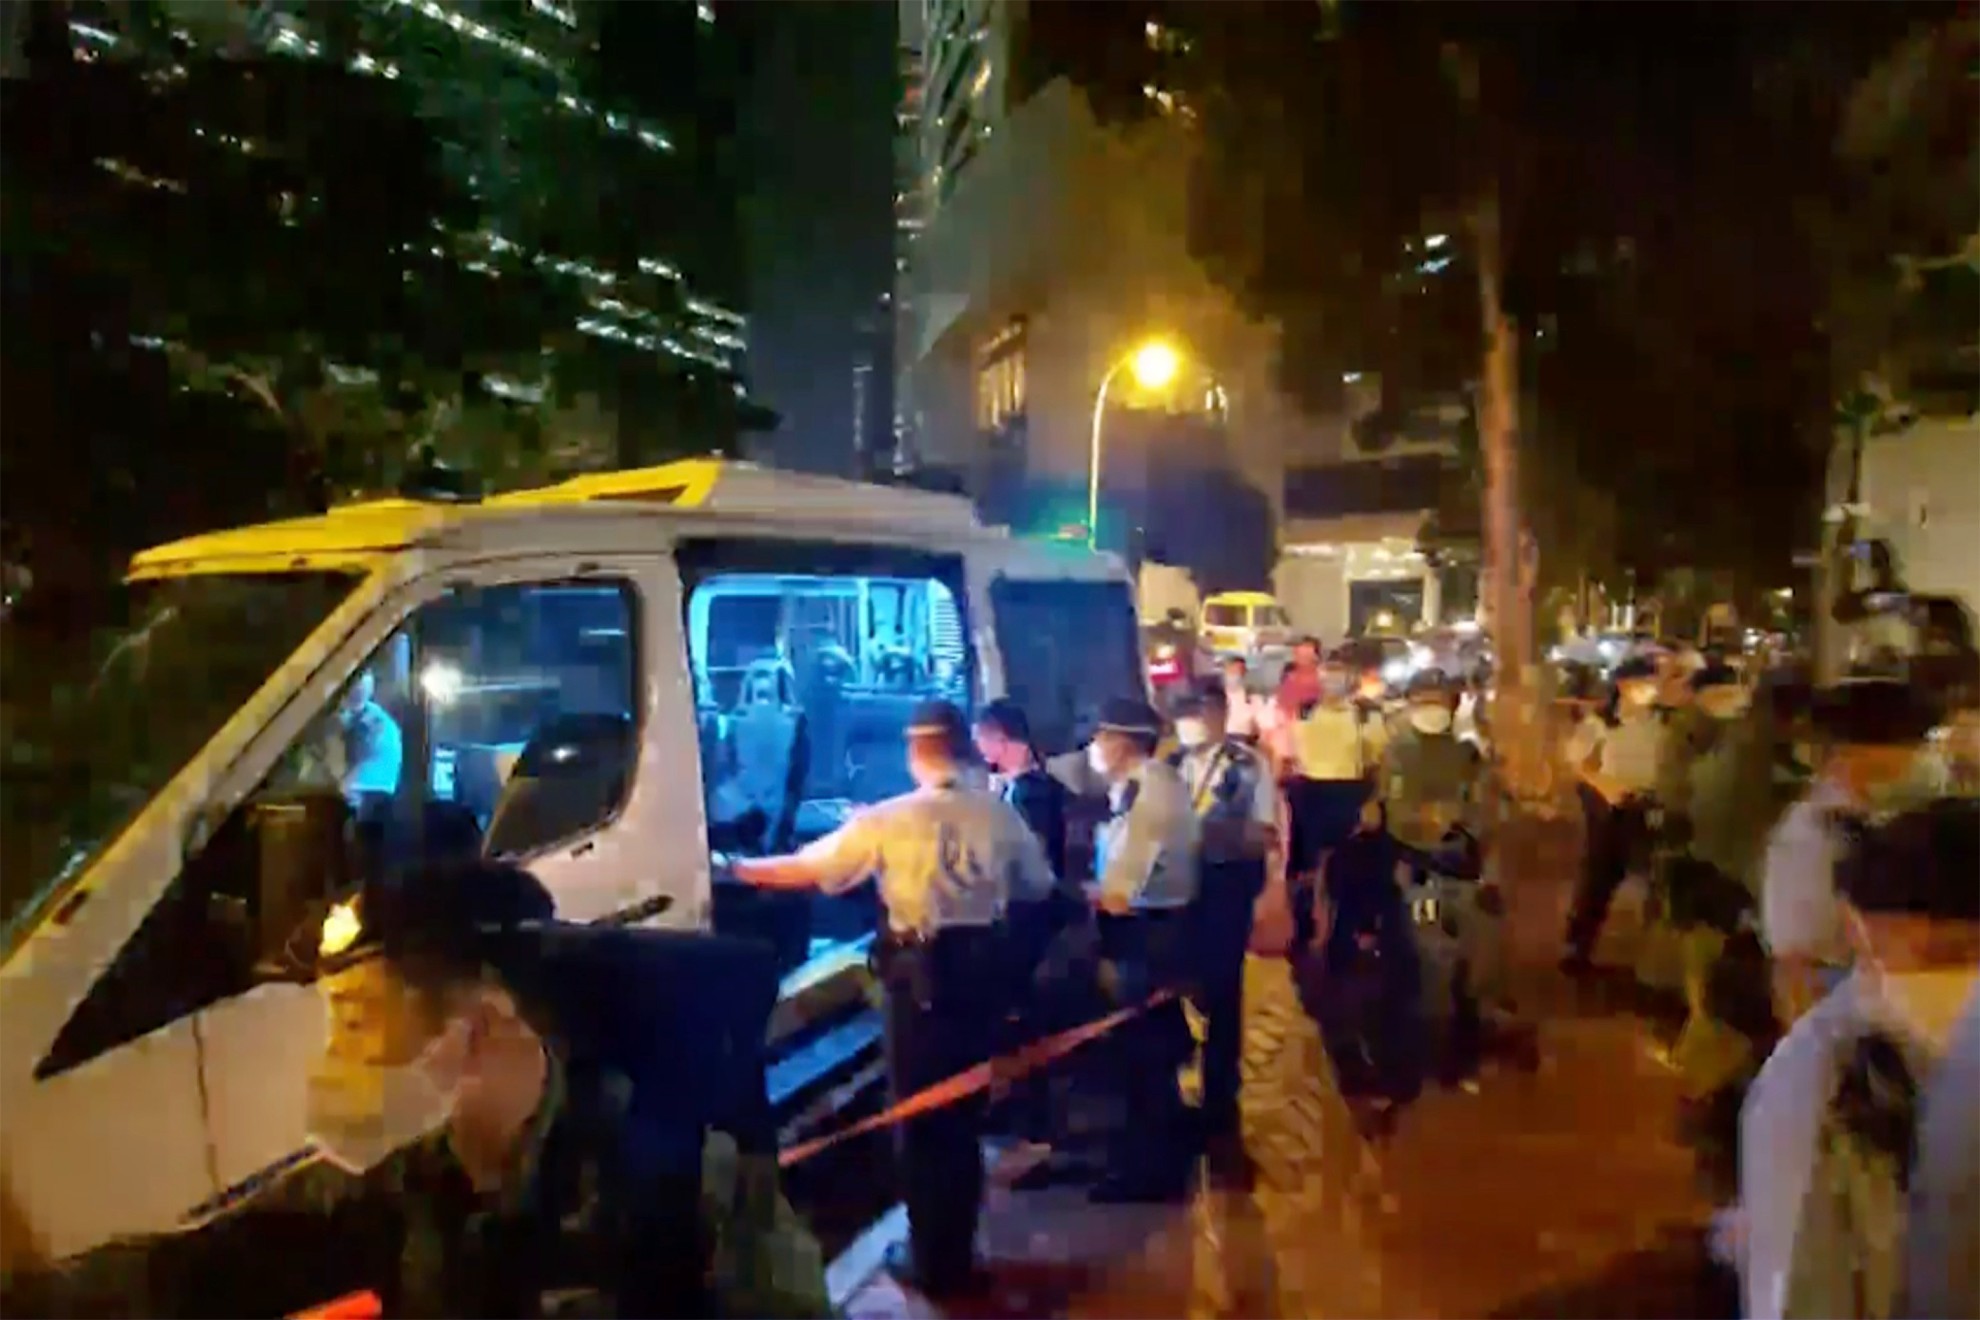 In this image police put the man, who played songs on a harmonica into police van. / AP